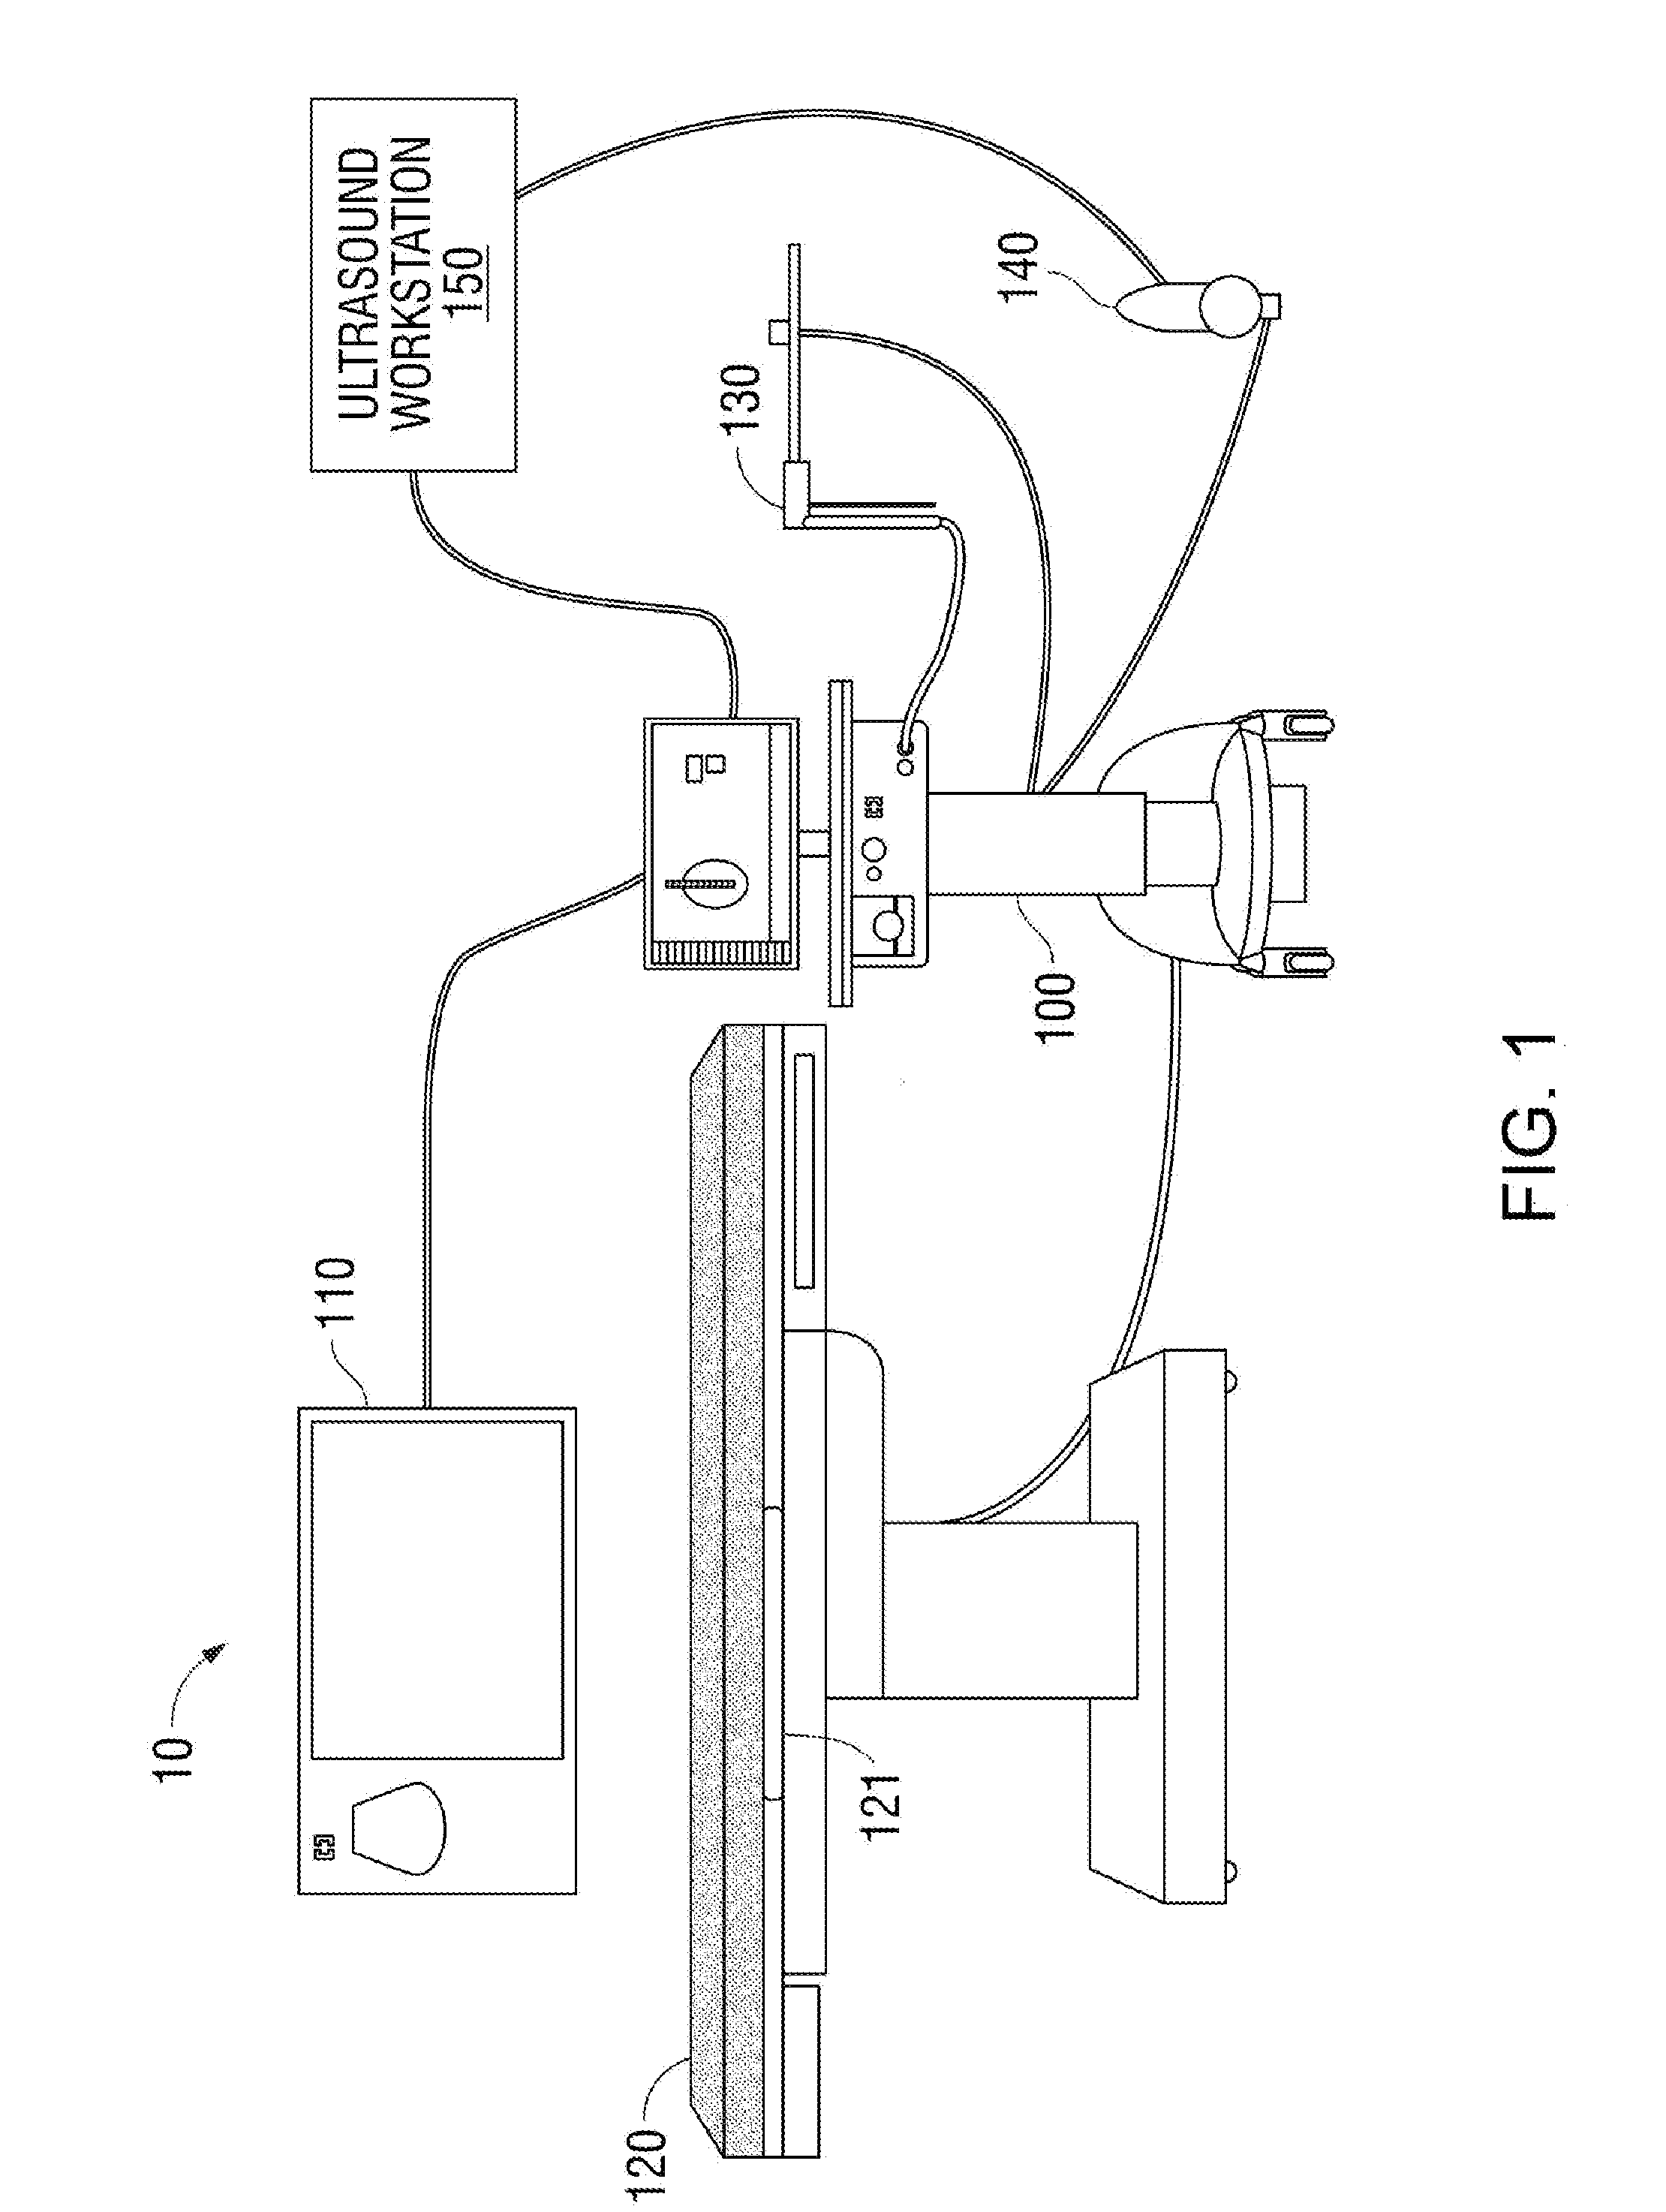 Methods for microwave ablation planning and procedure